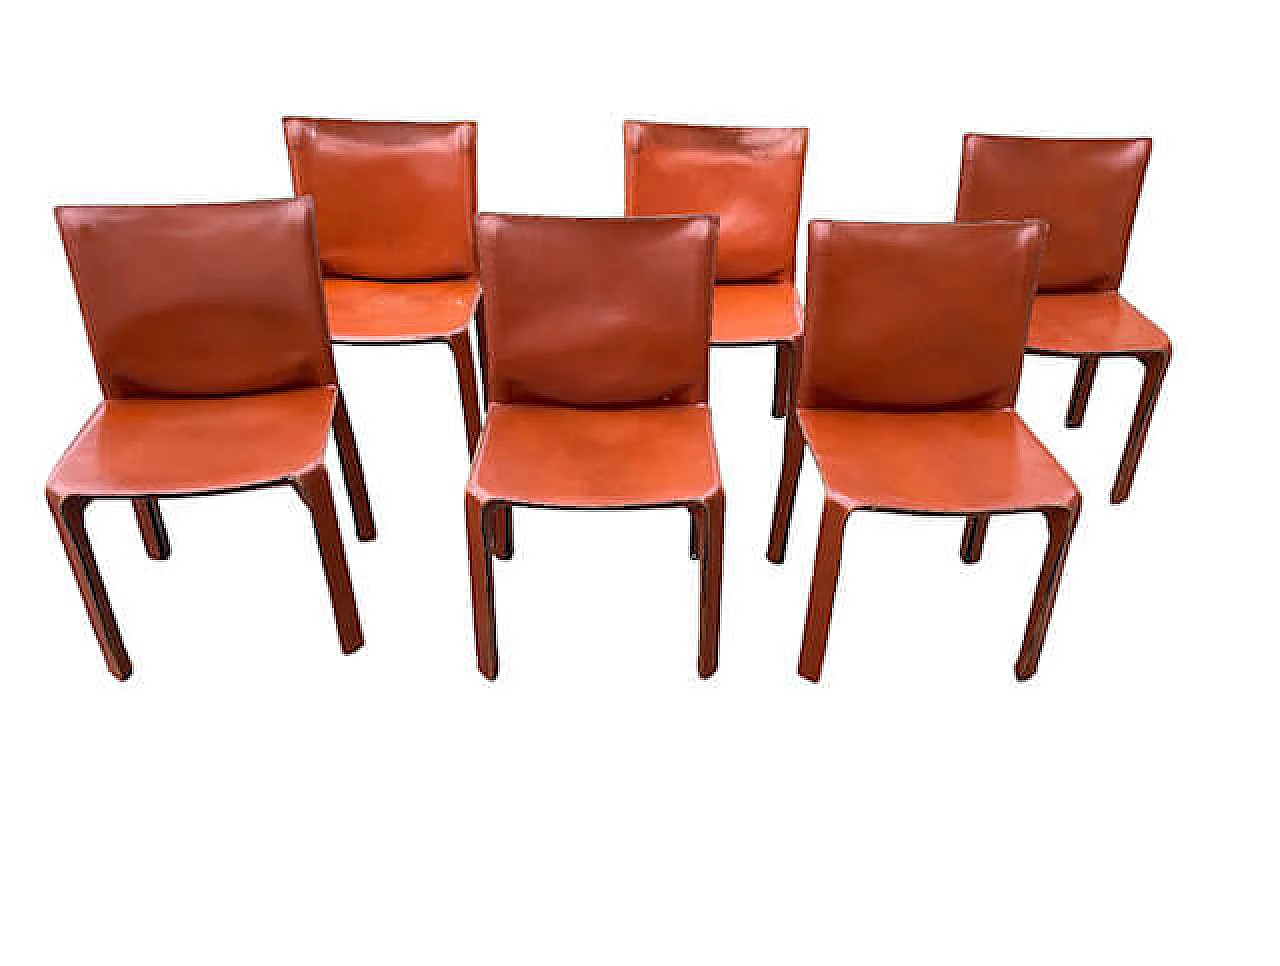 6 CAB 412 chairs by Mario Bellini for Cassina, 1970s 1